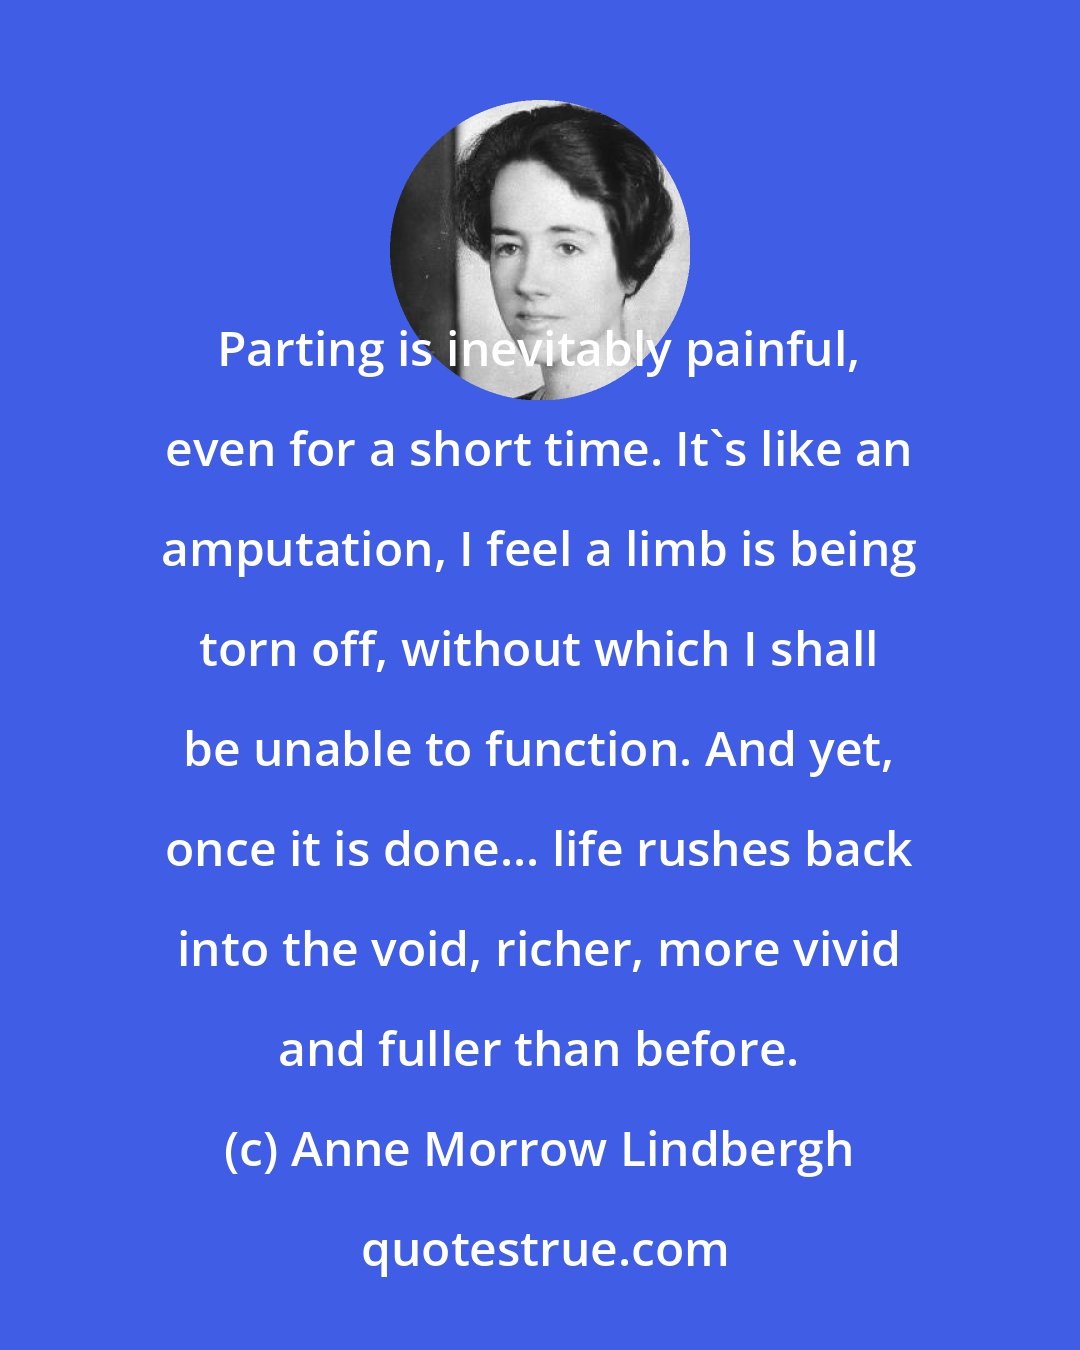 Anne Morrow Lindbergh: Parting is inevitably painful, even for a short time. It's like an amputation, I feel a limb is being torn off, without which I shall be unable to function. And yet, once it is done... life rushes back into the void, richer, more vivid and fuller than before.